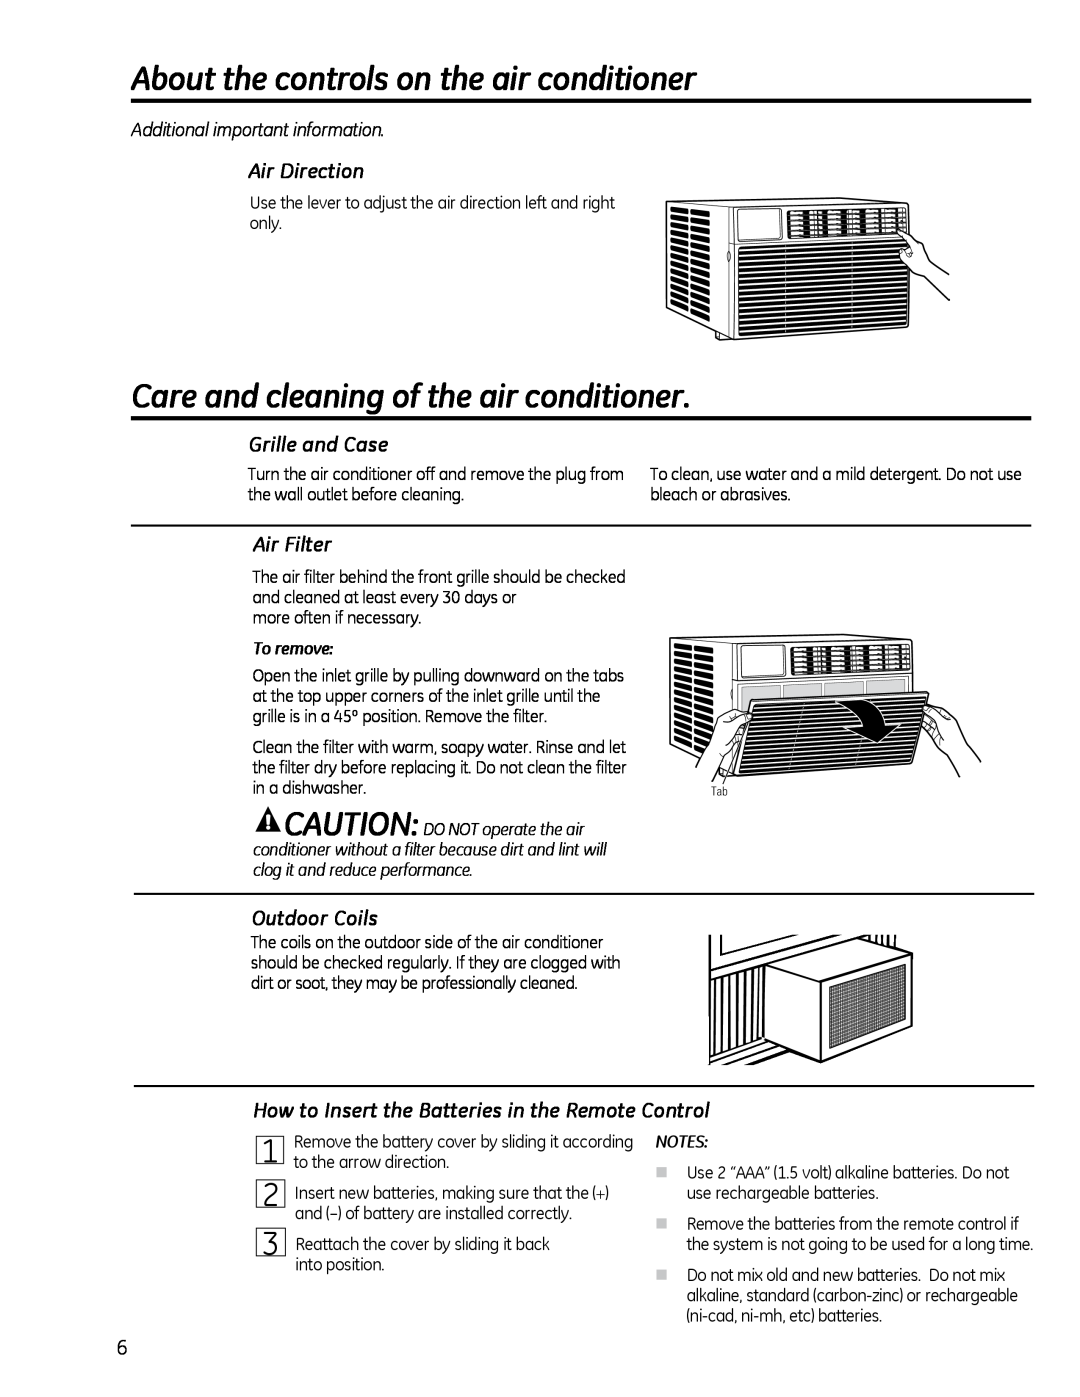 GE AEQ2 Care and cleaning of the air conditioner, Air Direction, Grille and Case, Air Filter, Outdoor Coils, To remove 